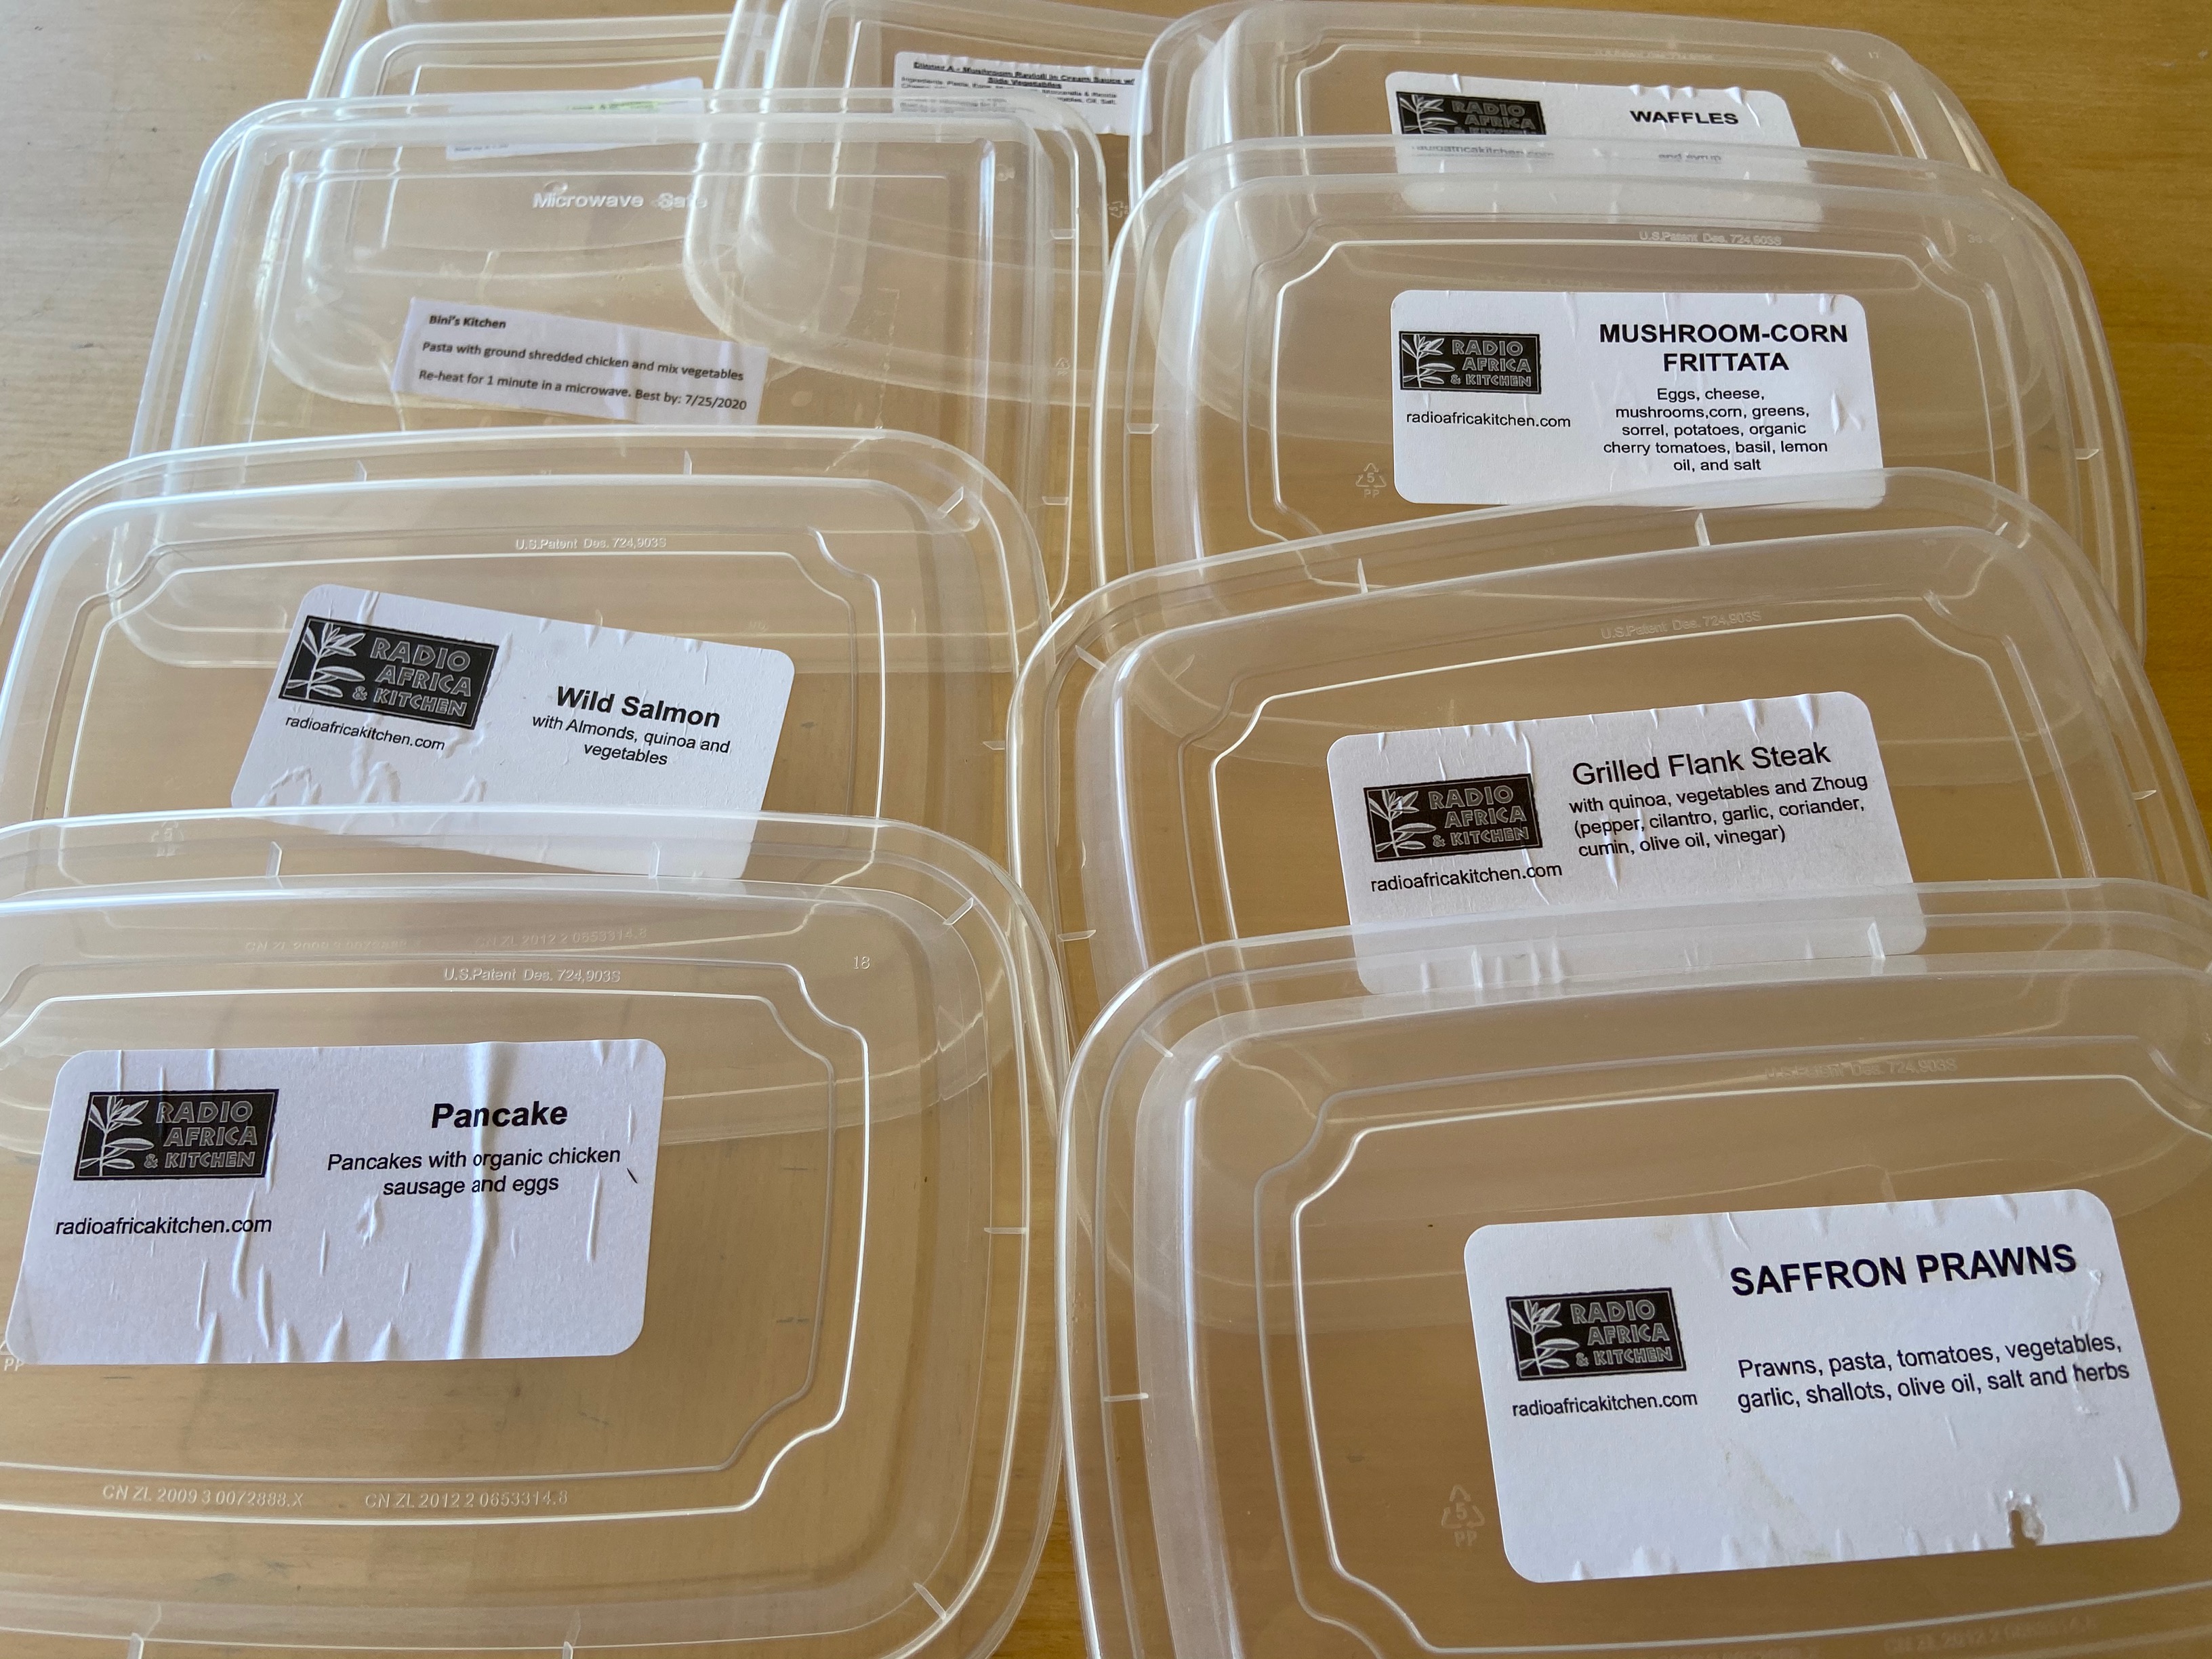 Photo of boxes of meals delivered from Great Plates